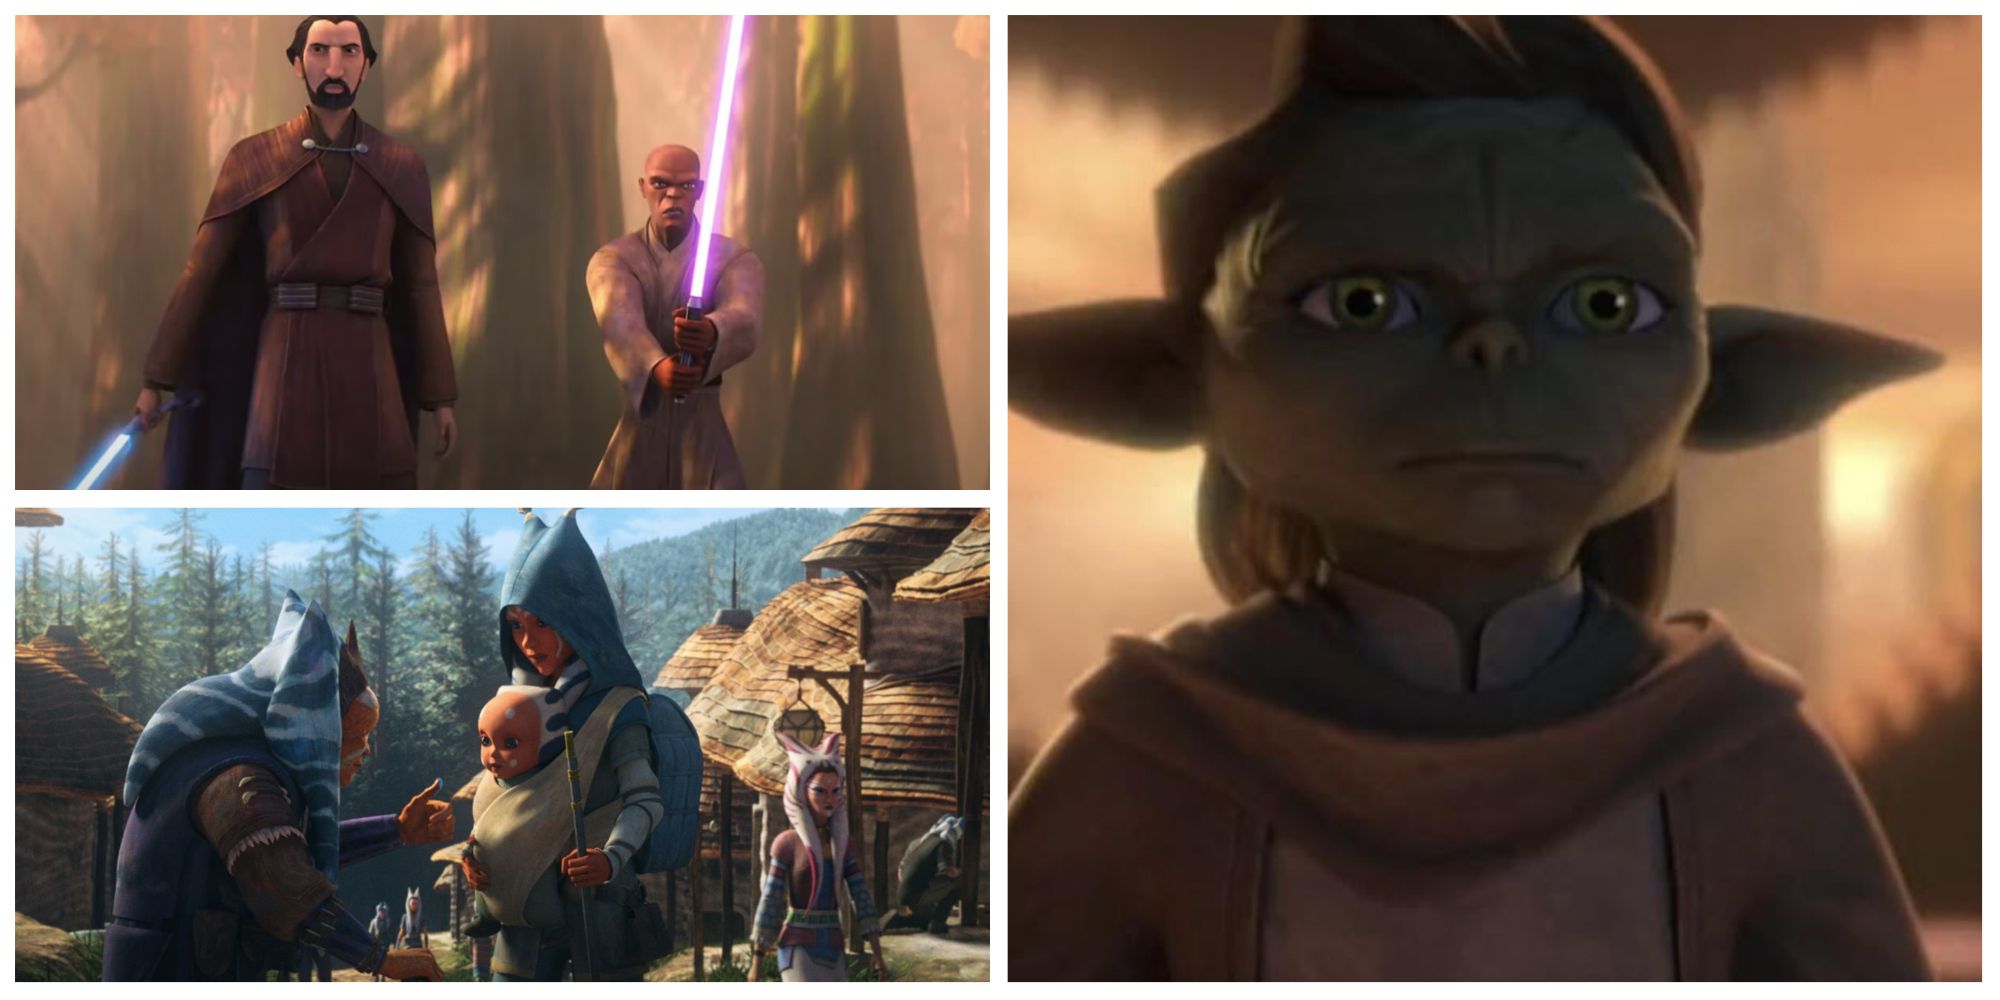 Tales of the Jedi' explores important 'Star Wars' moments – The Oswegonian